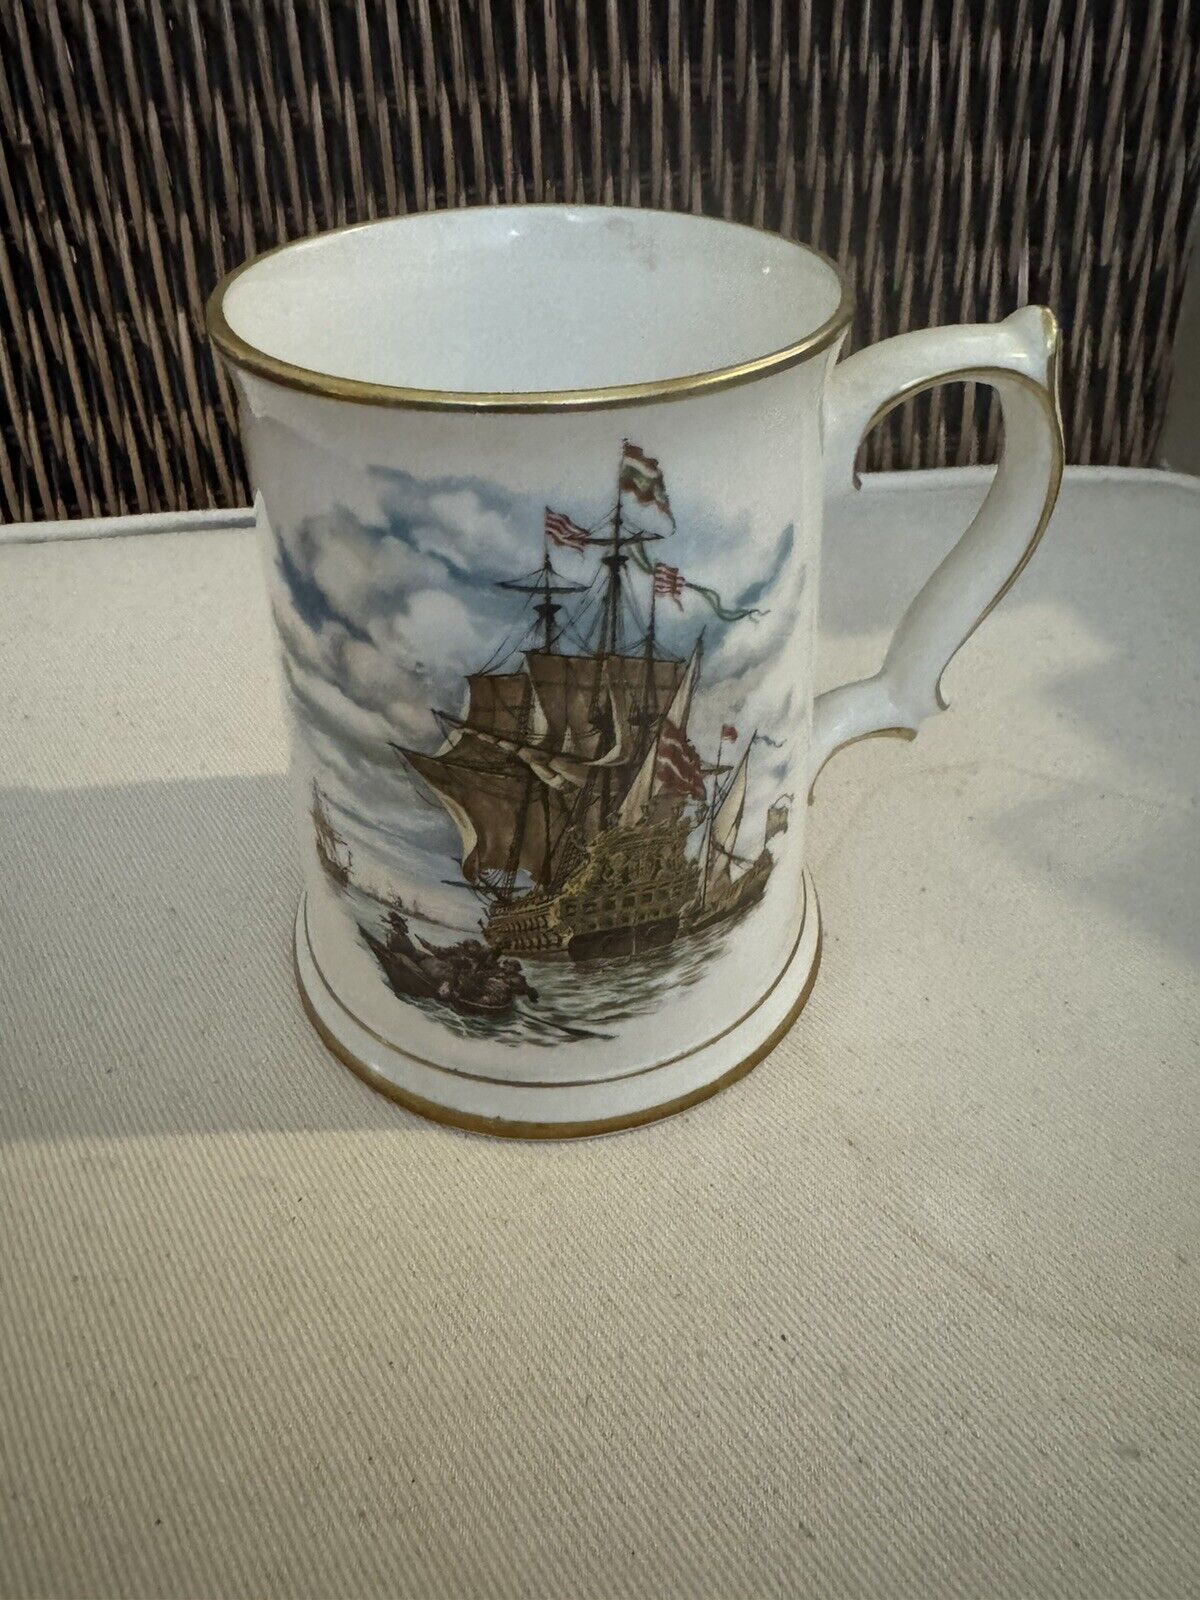 Vintage Mug With Sailboat Made In England Very Rare Vintage Excellent Condition 